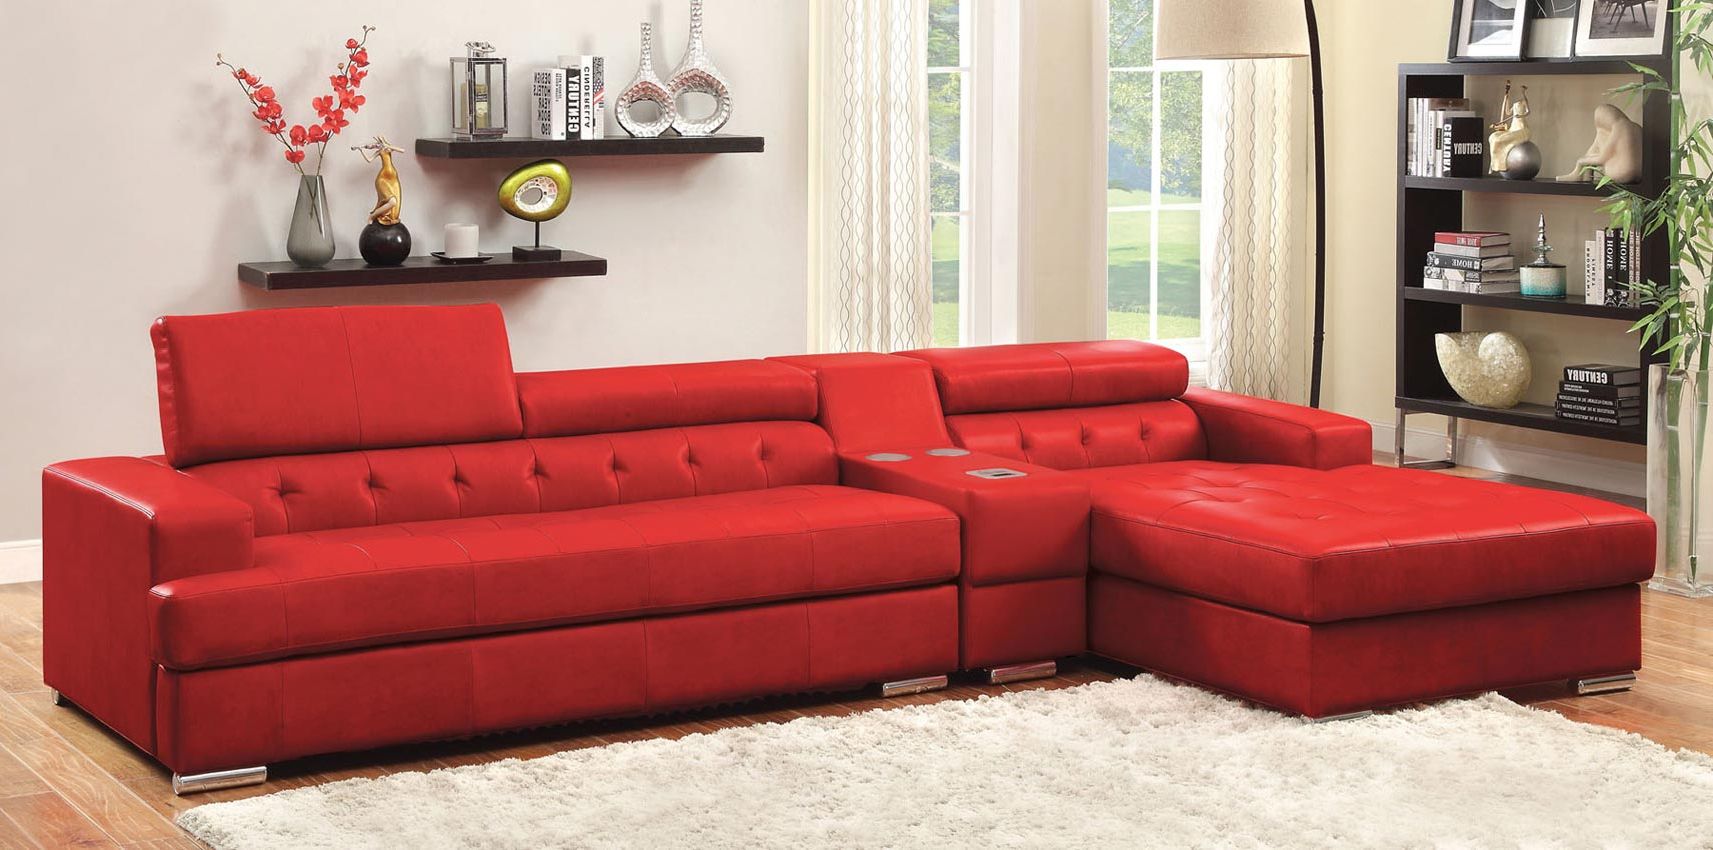 3 Pcs Red Leather Sofa Set With Console Pertaining To Popular Red Sofas (Gallery 4 of 20)